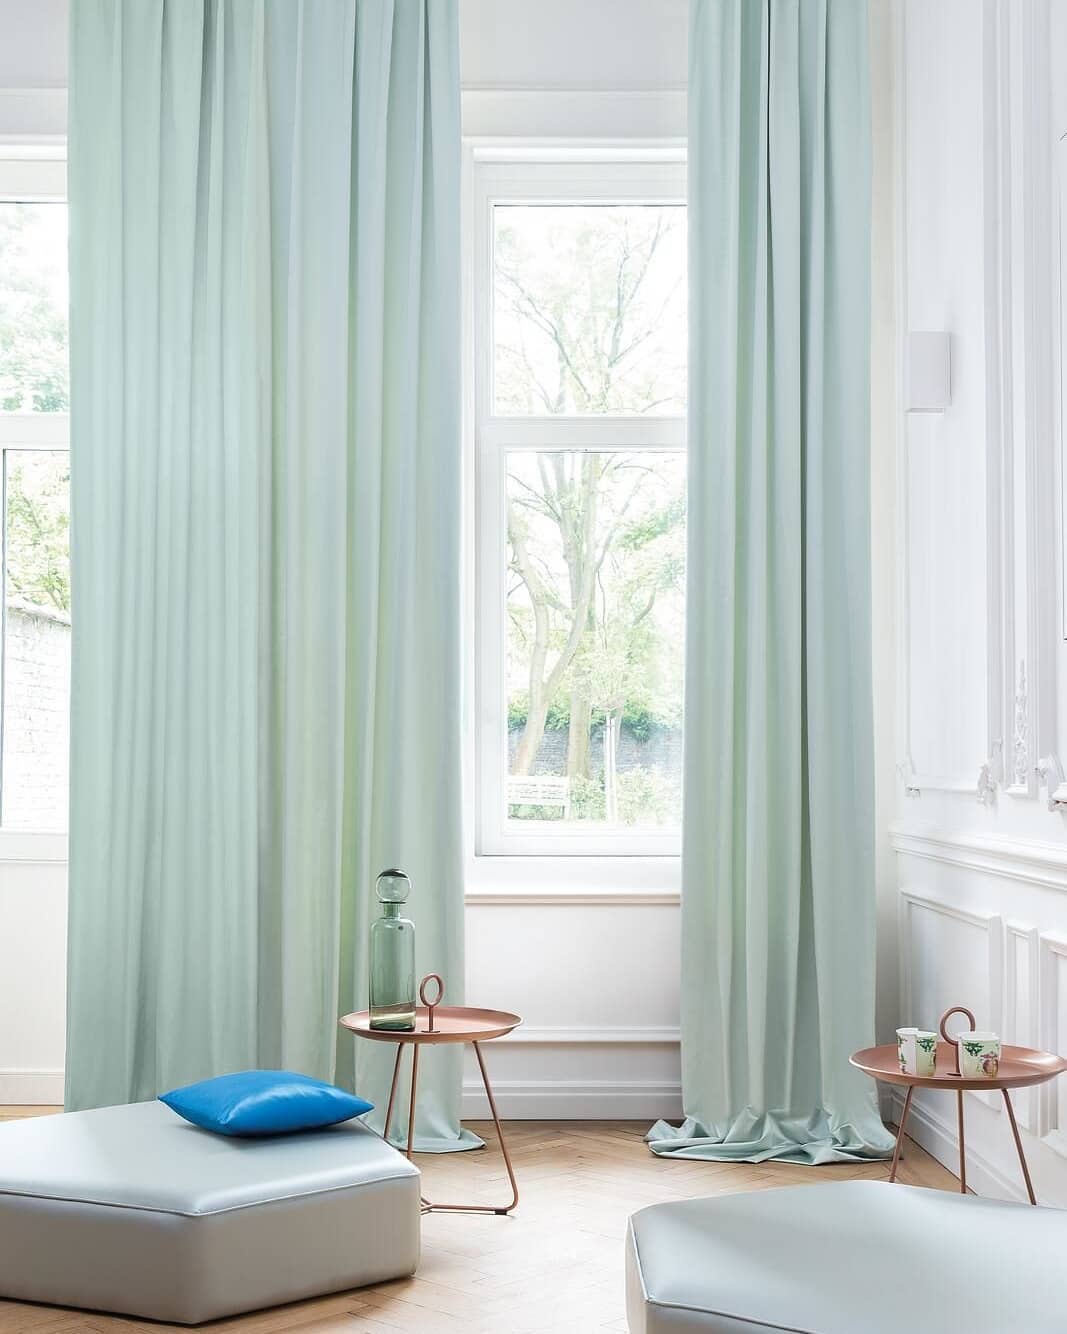 long pastel curtains over two long windows in a living space filled with natural light